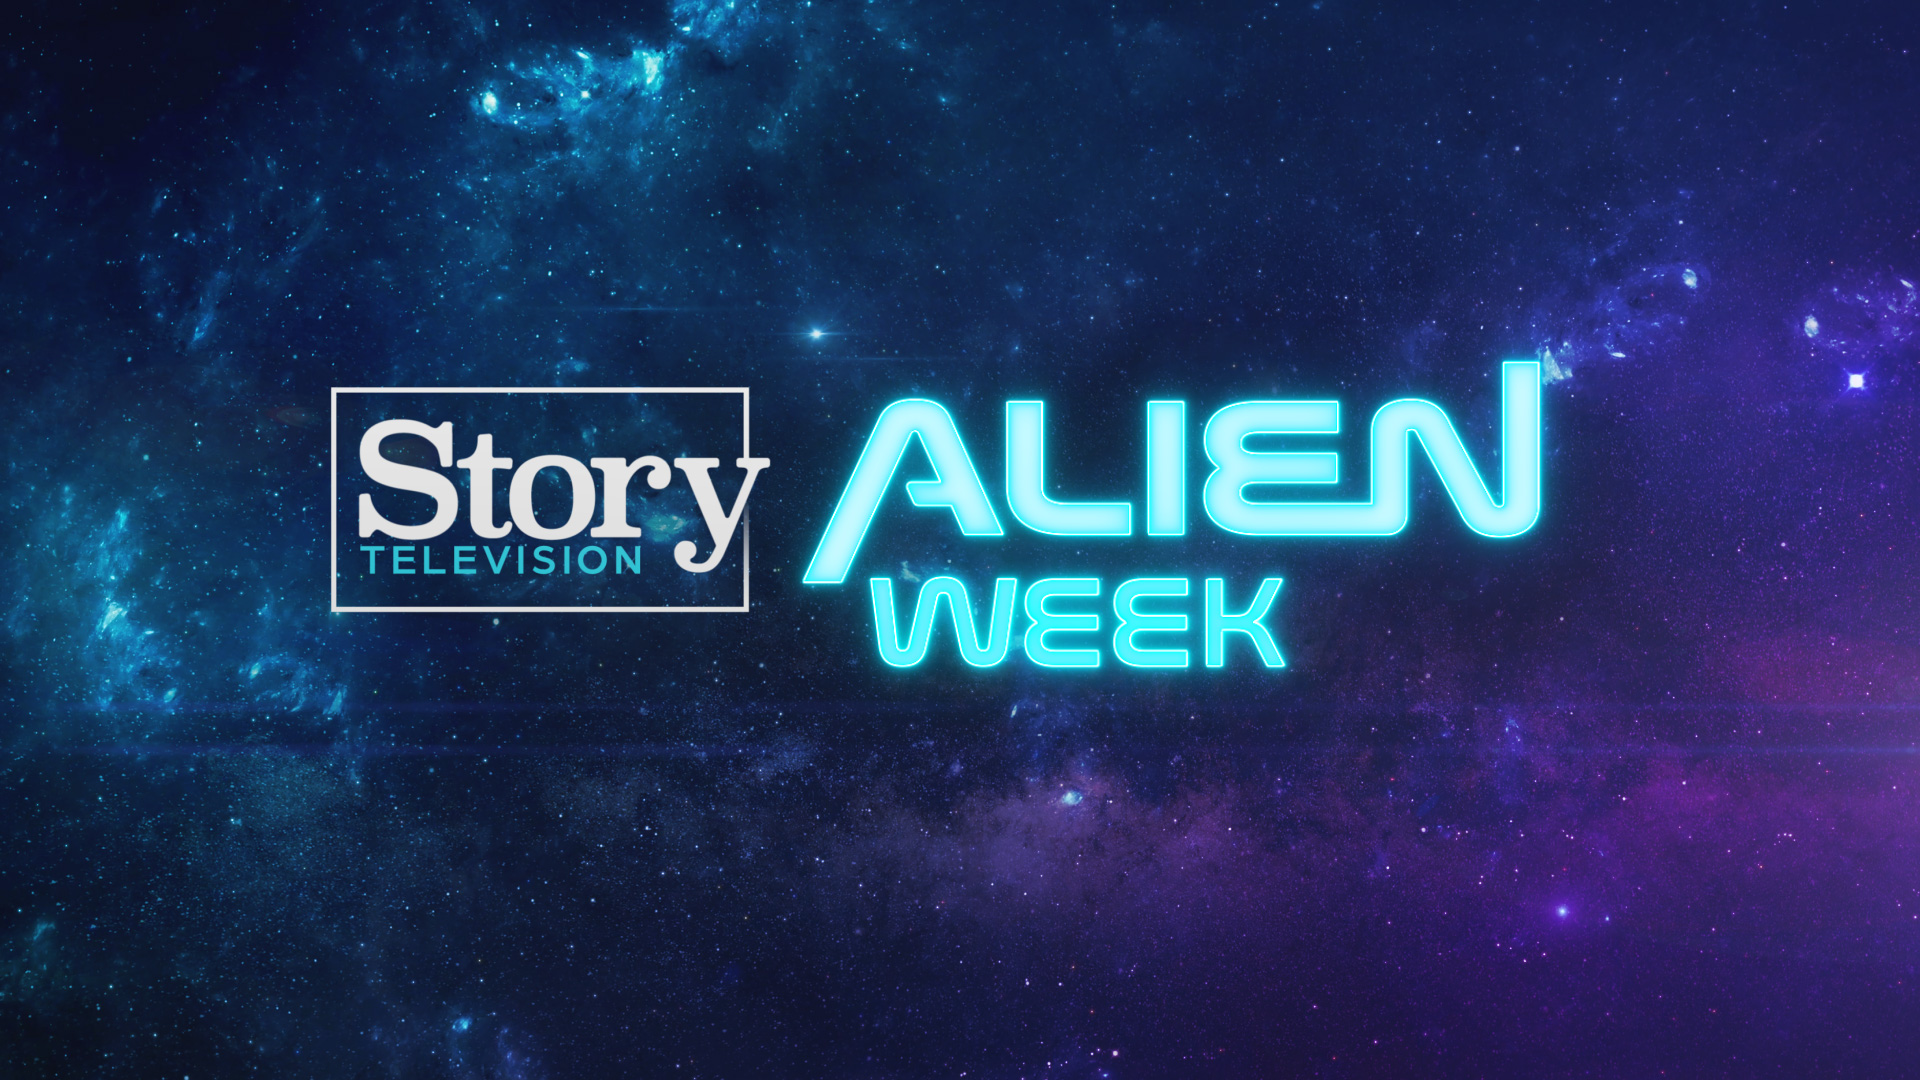 Story Television Network is Getting Set For an Alien Invasion Free On OTA TV